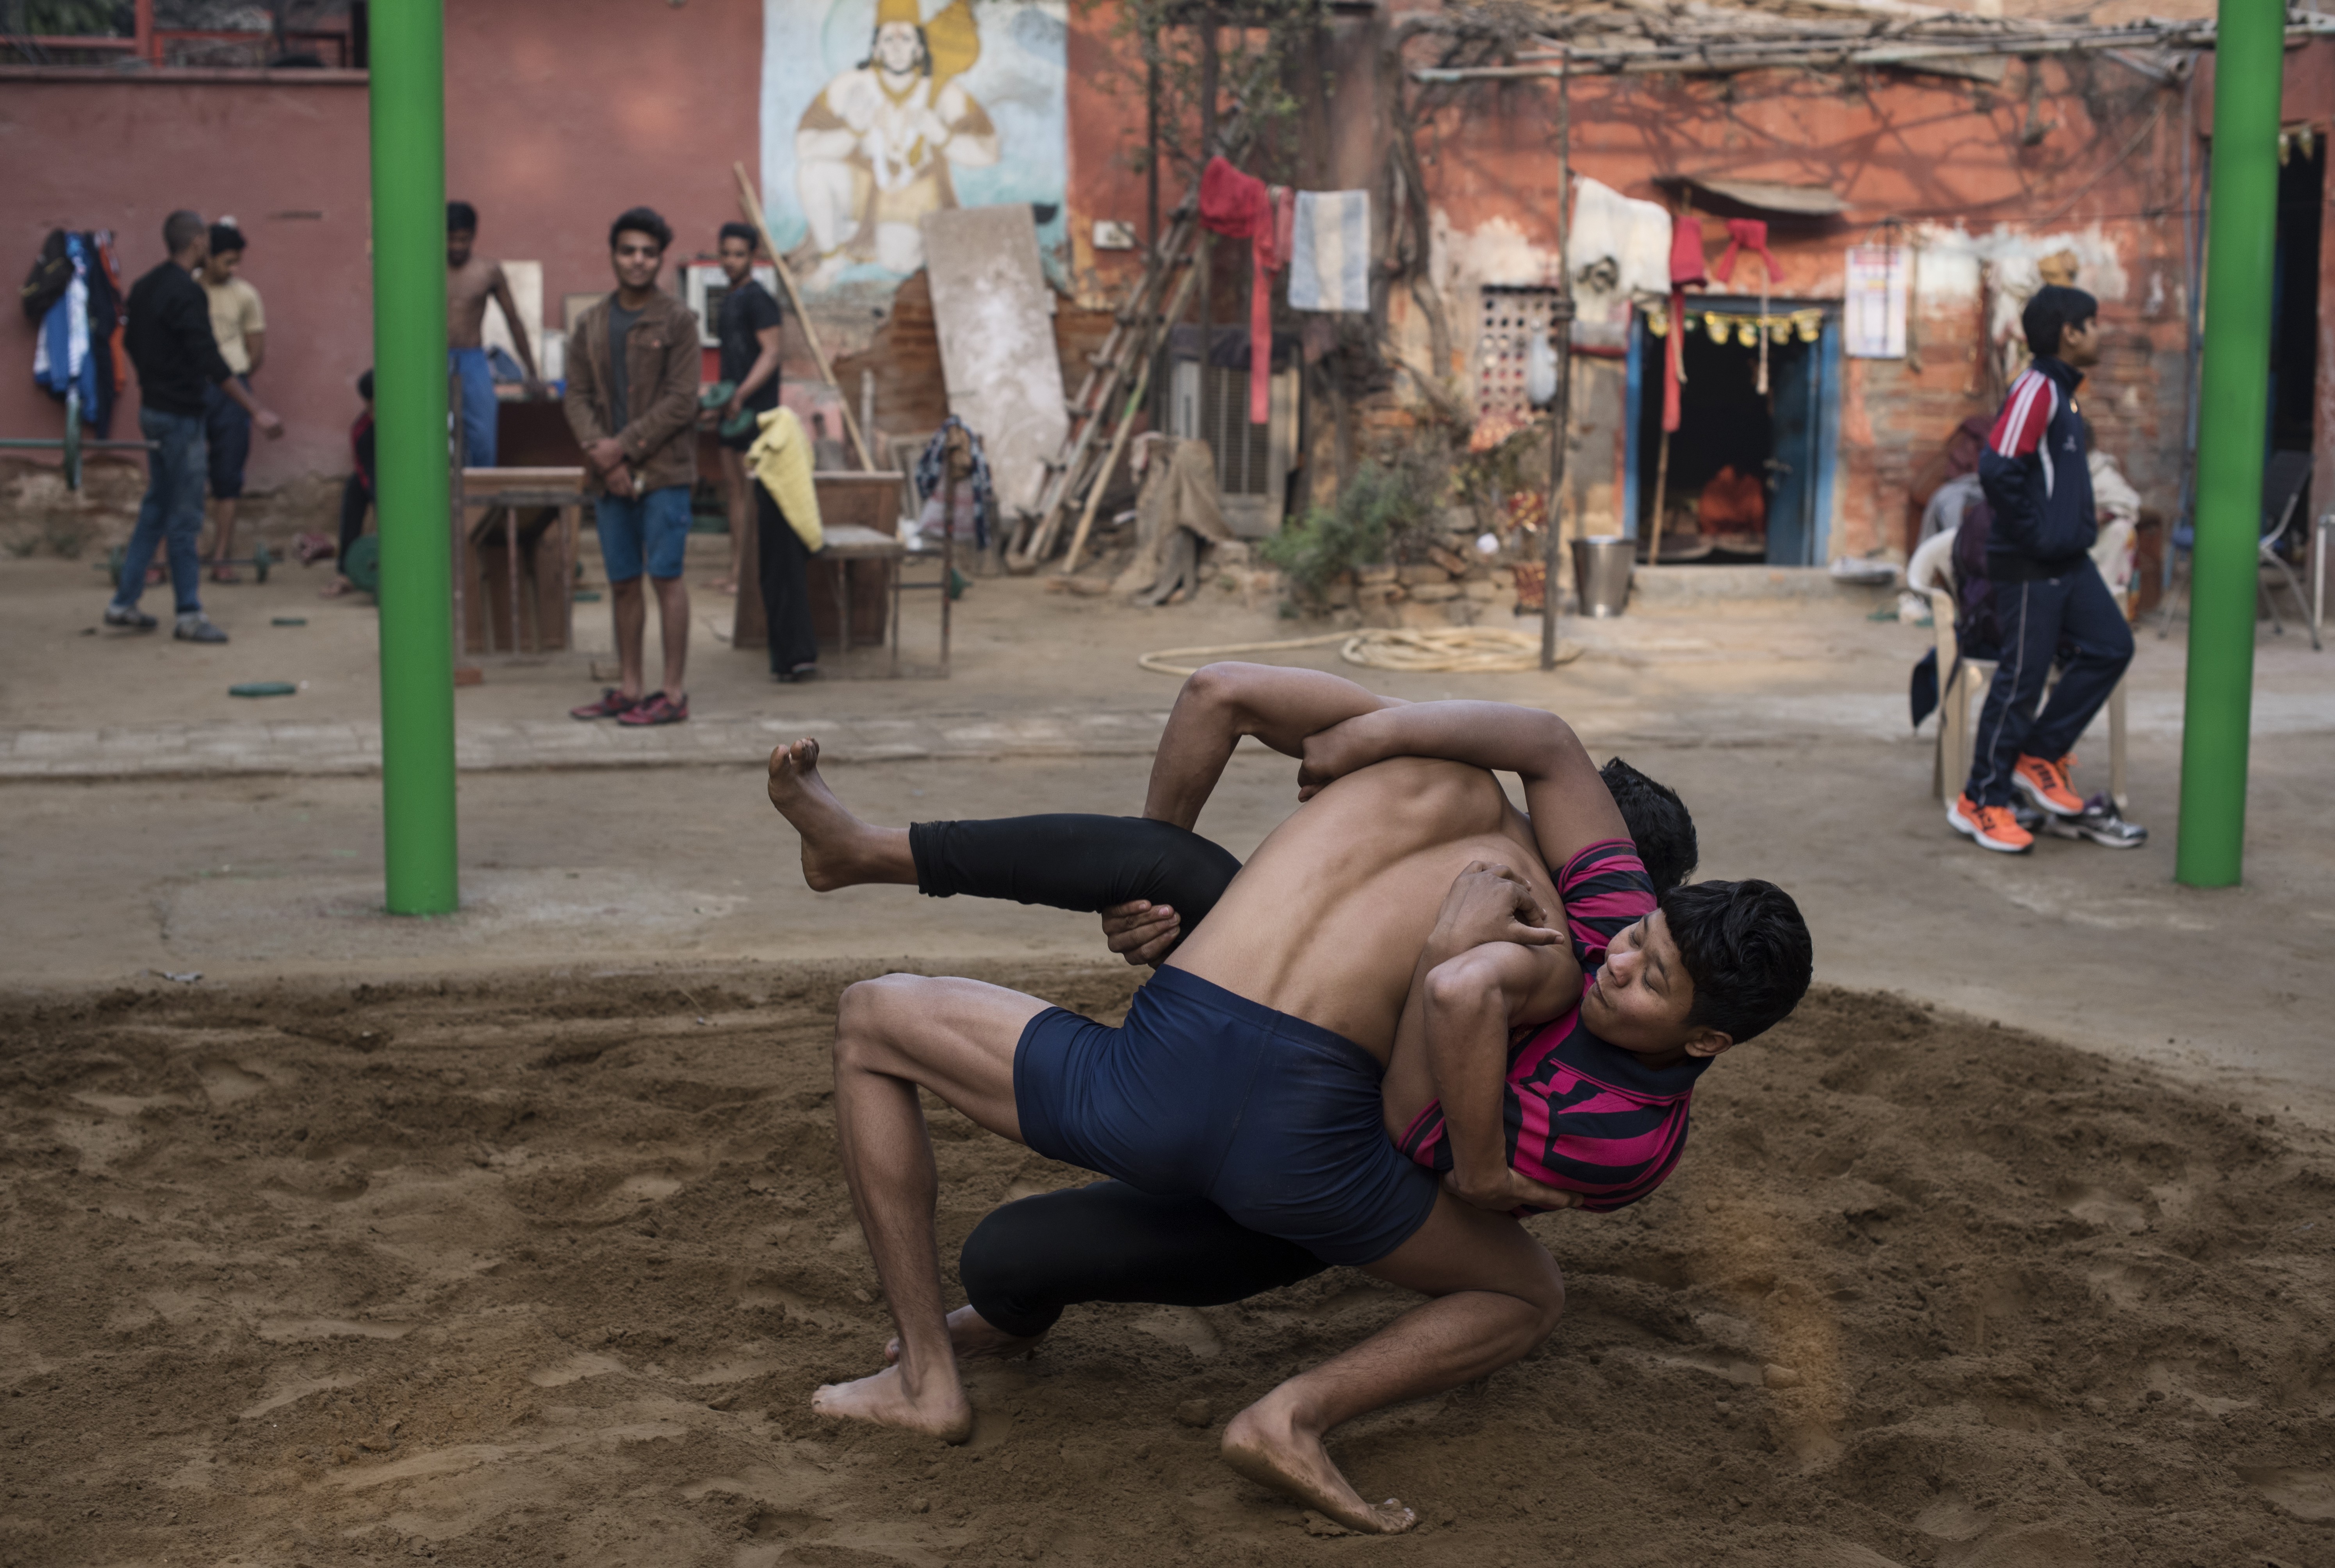 Their families worry they won’t find husbands but Delhi’s determined young kushti fighters are putting the sport first